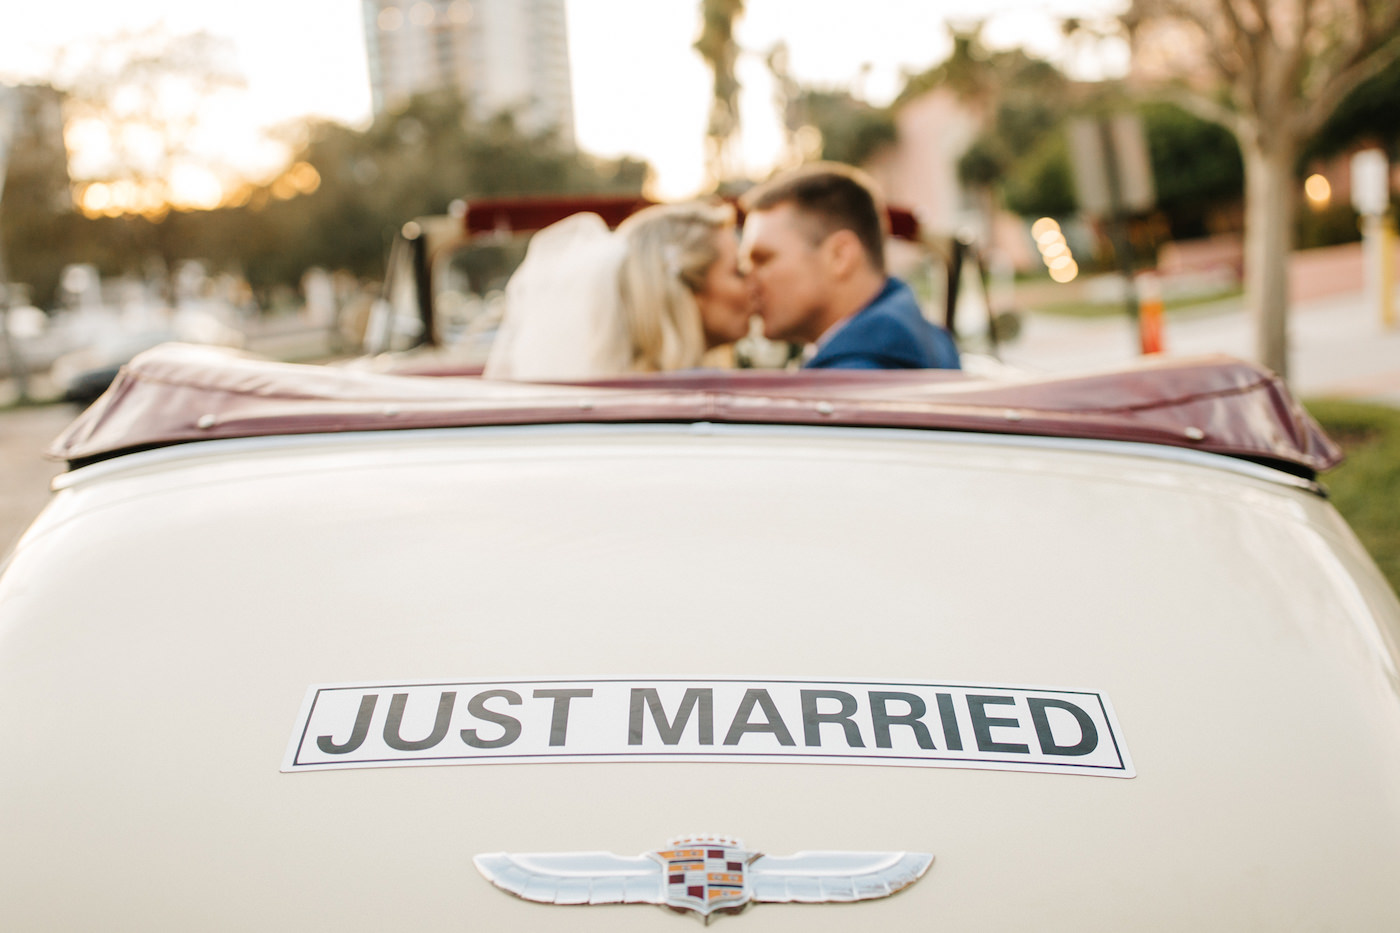 Tampa Bay Bride and Groom Just Married in Vintage Classic Car in Downtown St Petersburg